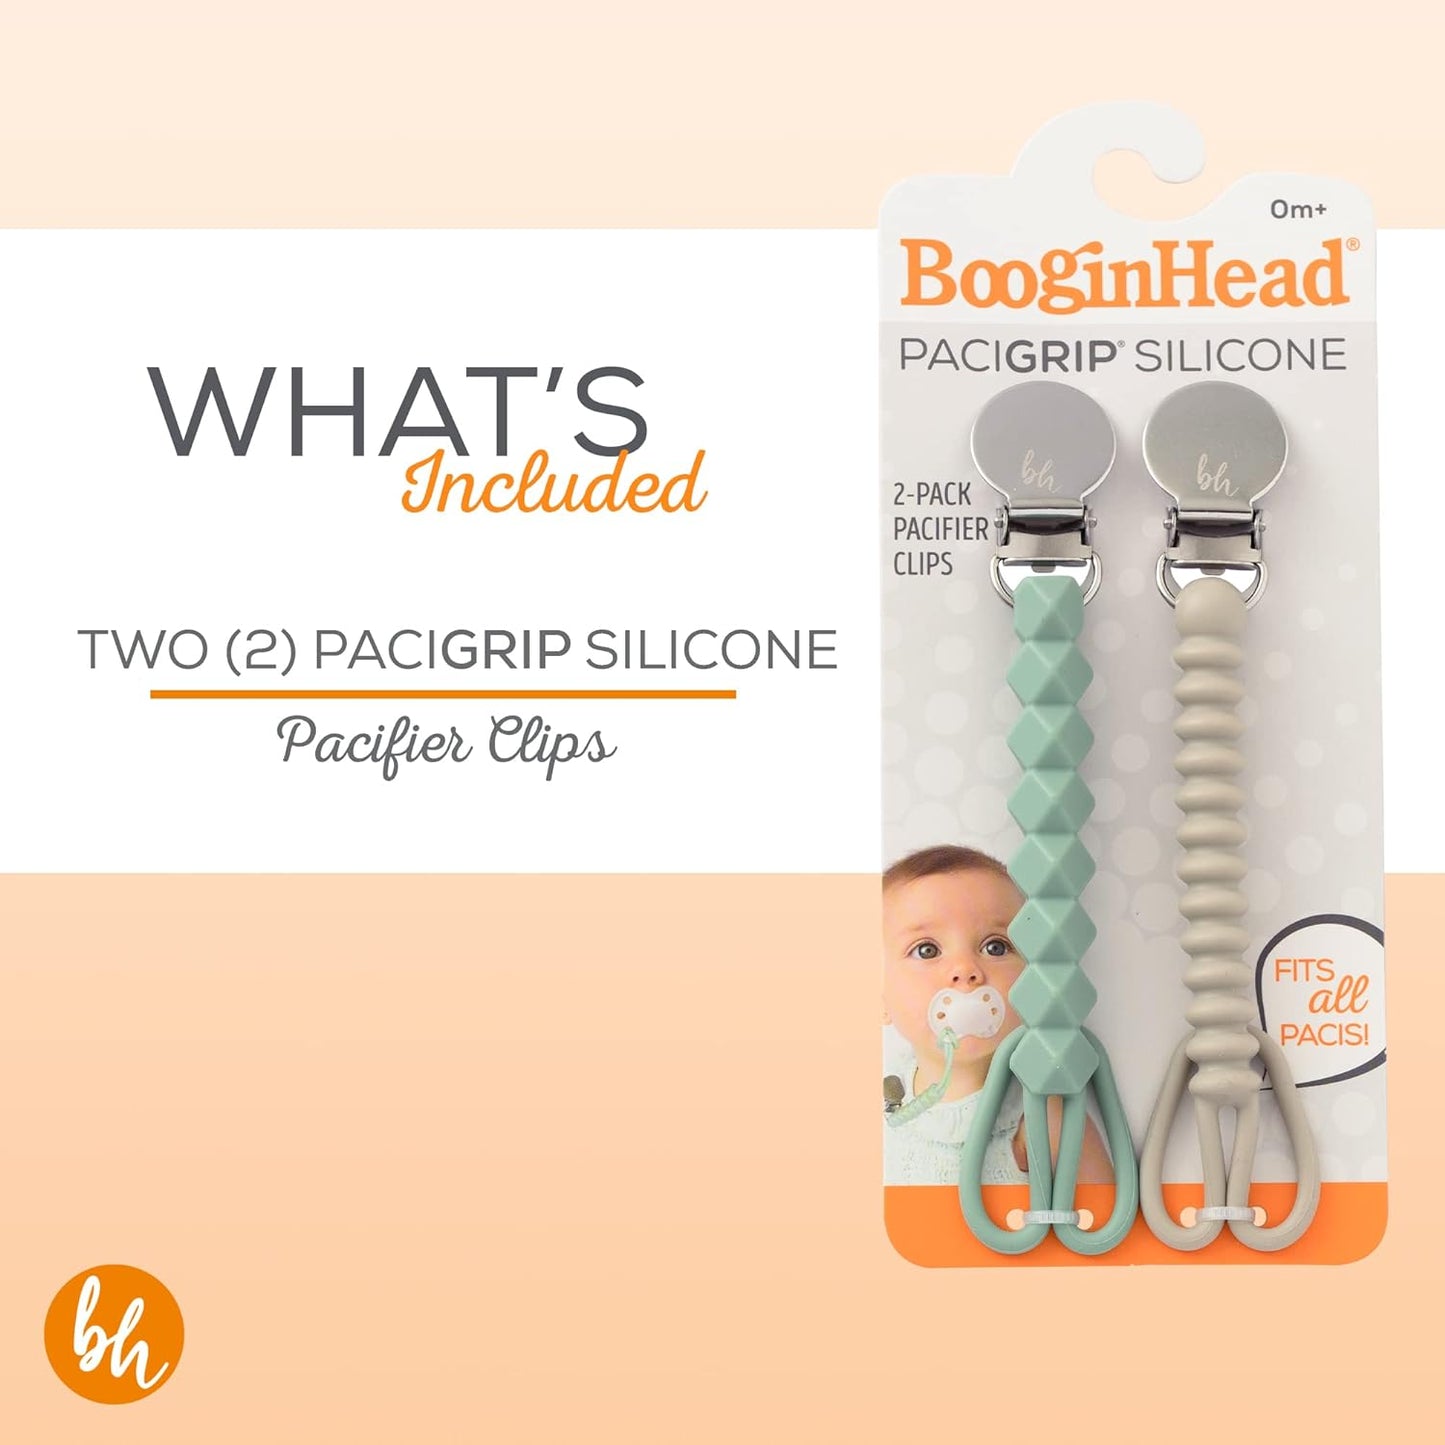 BooginHead Silicone Pacifier Clip - Baby Pacifier Holder - 2 Pack